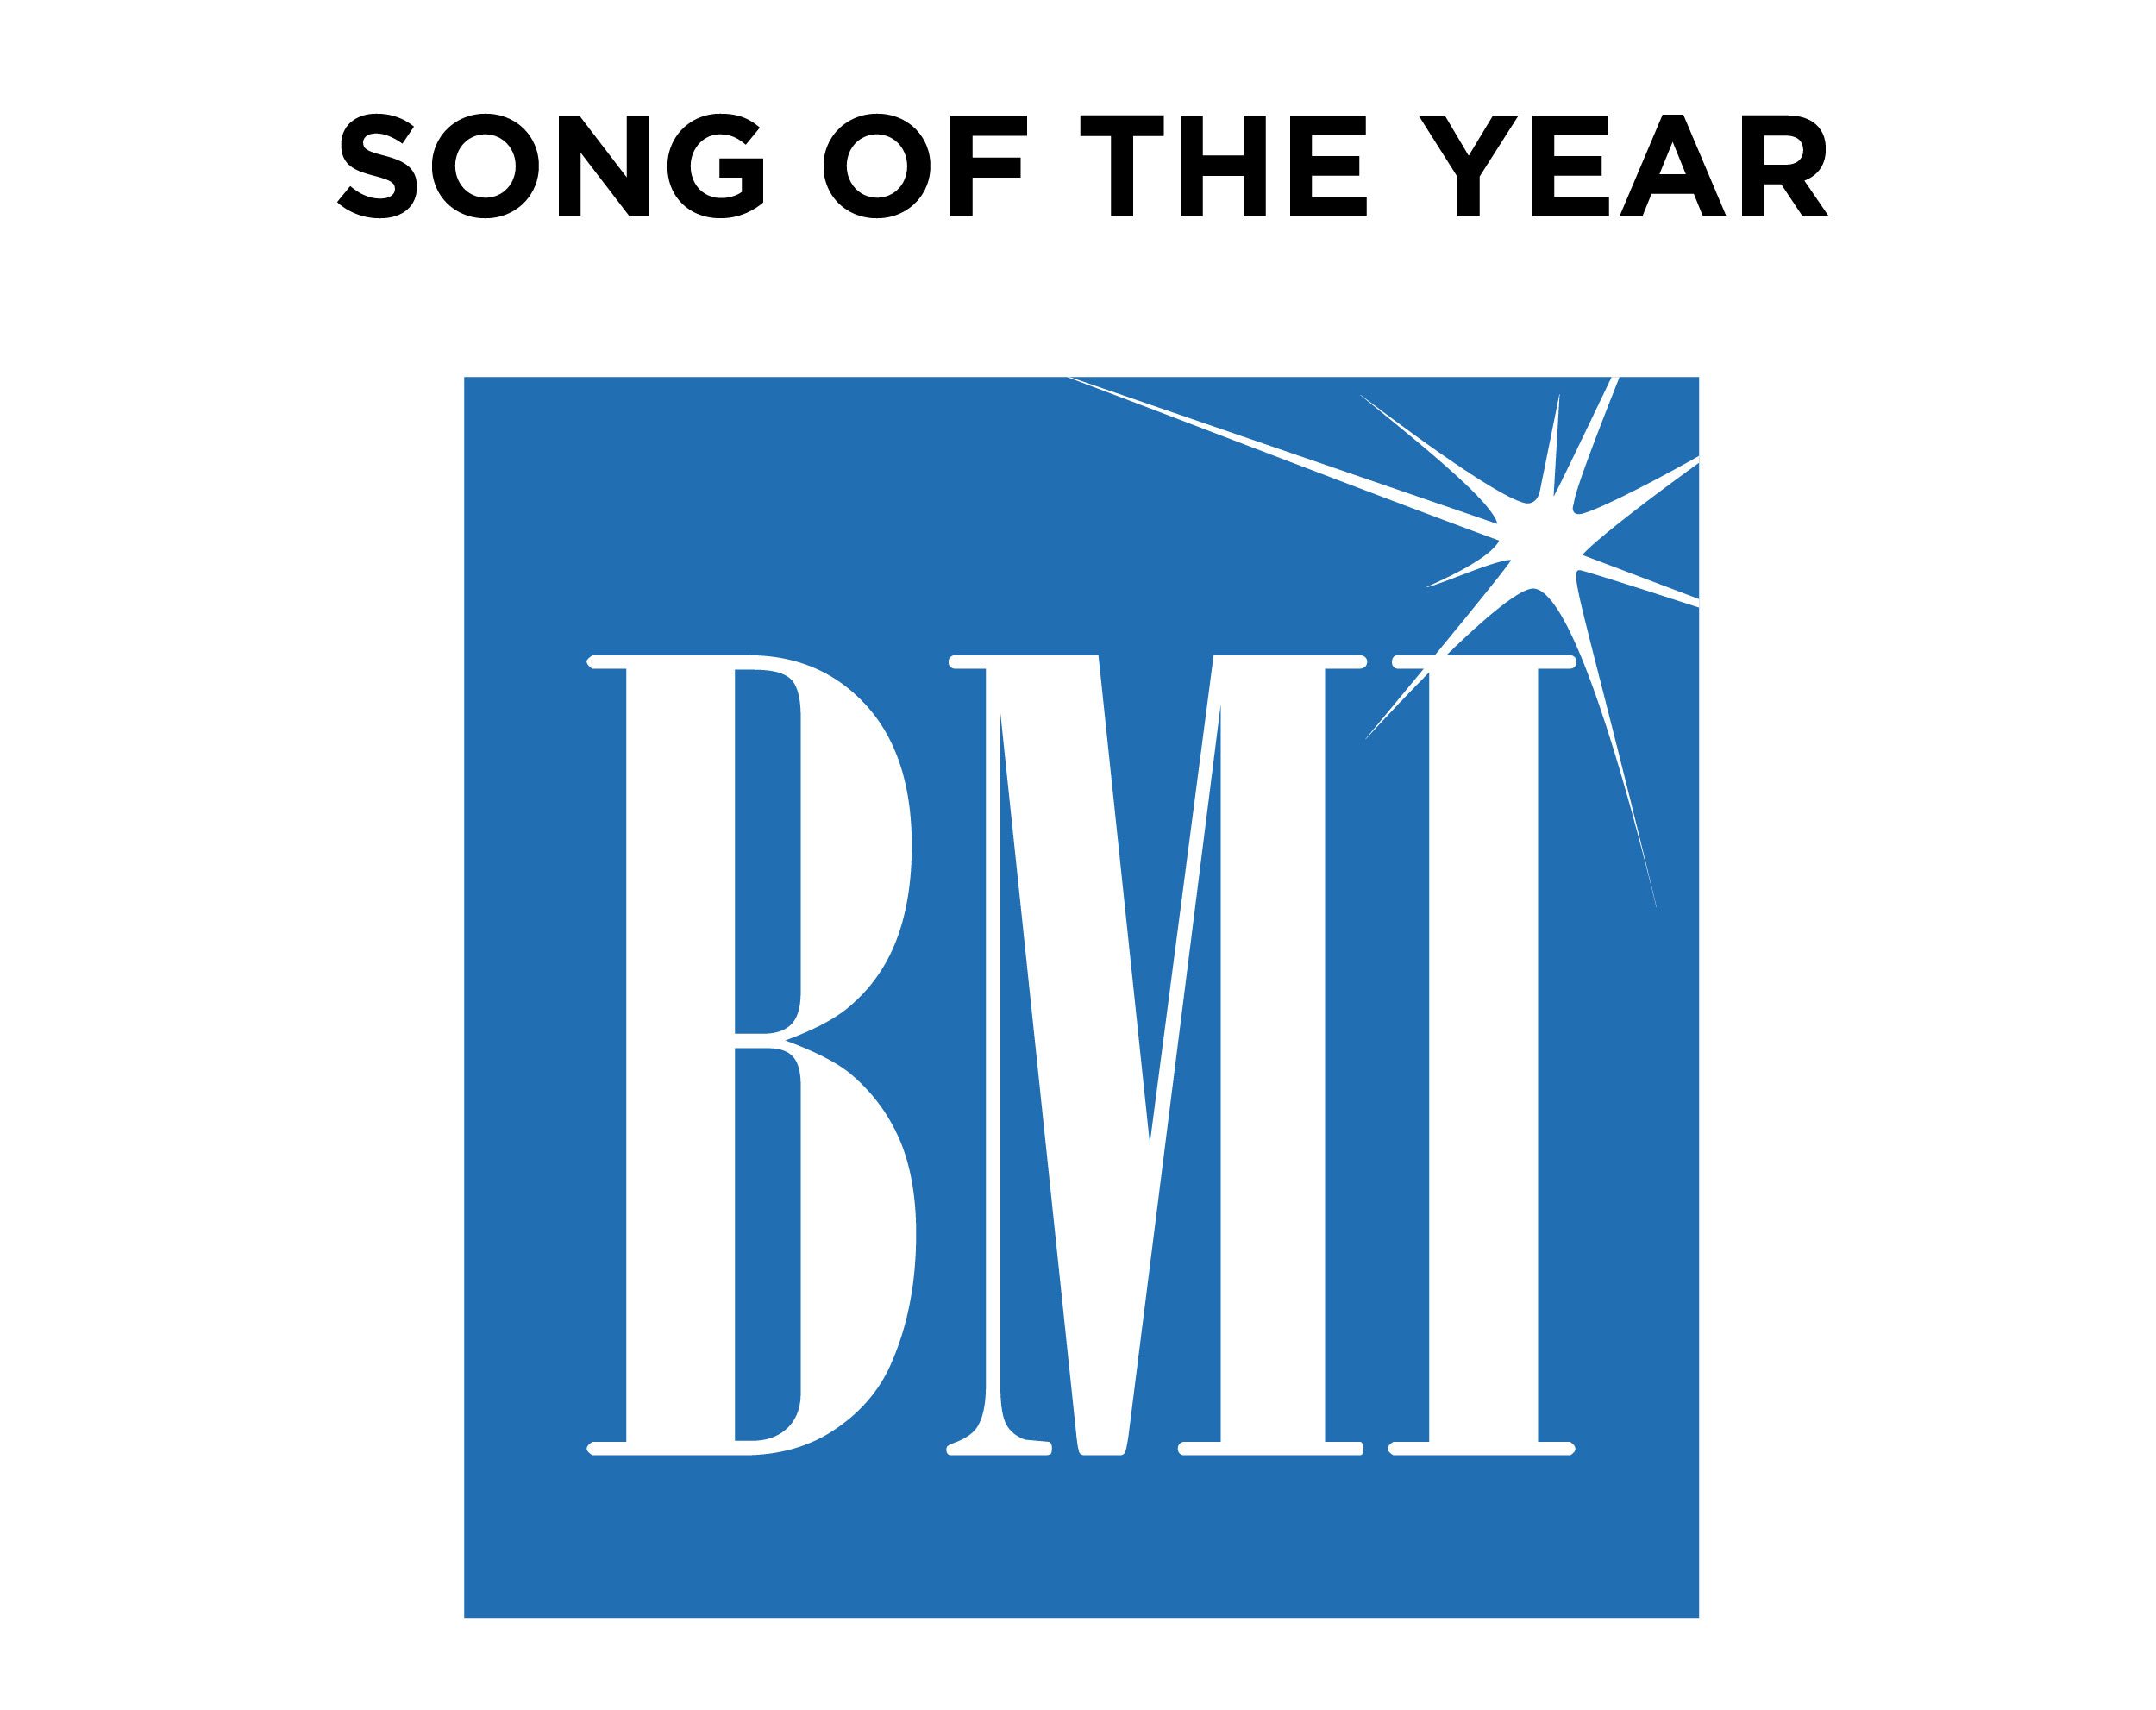 bmi repertoire song search